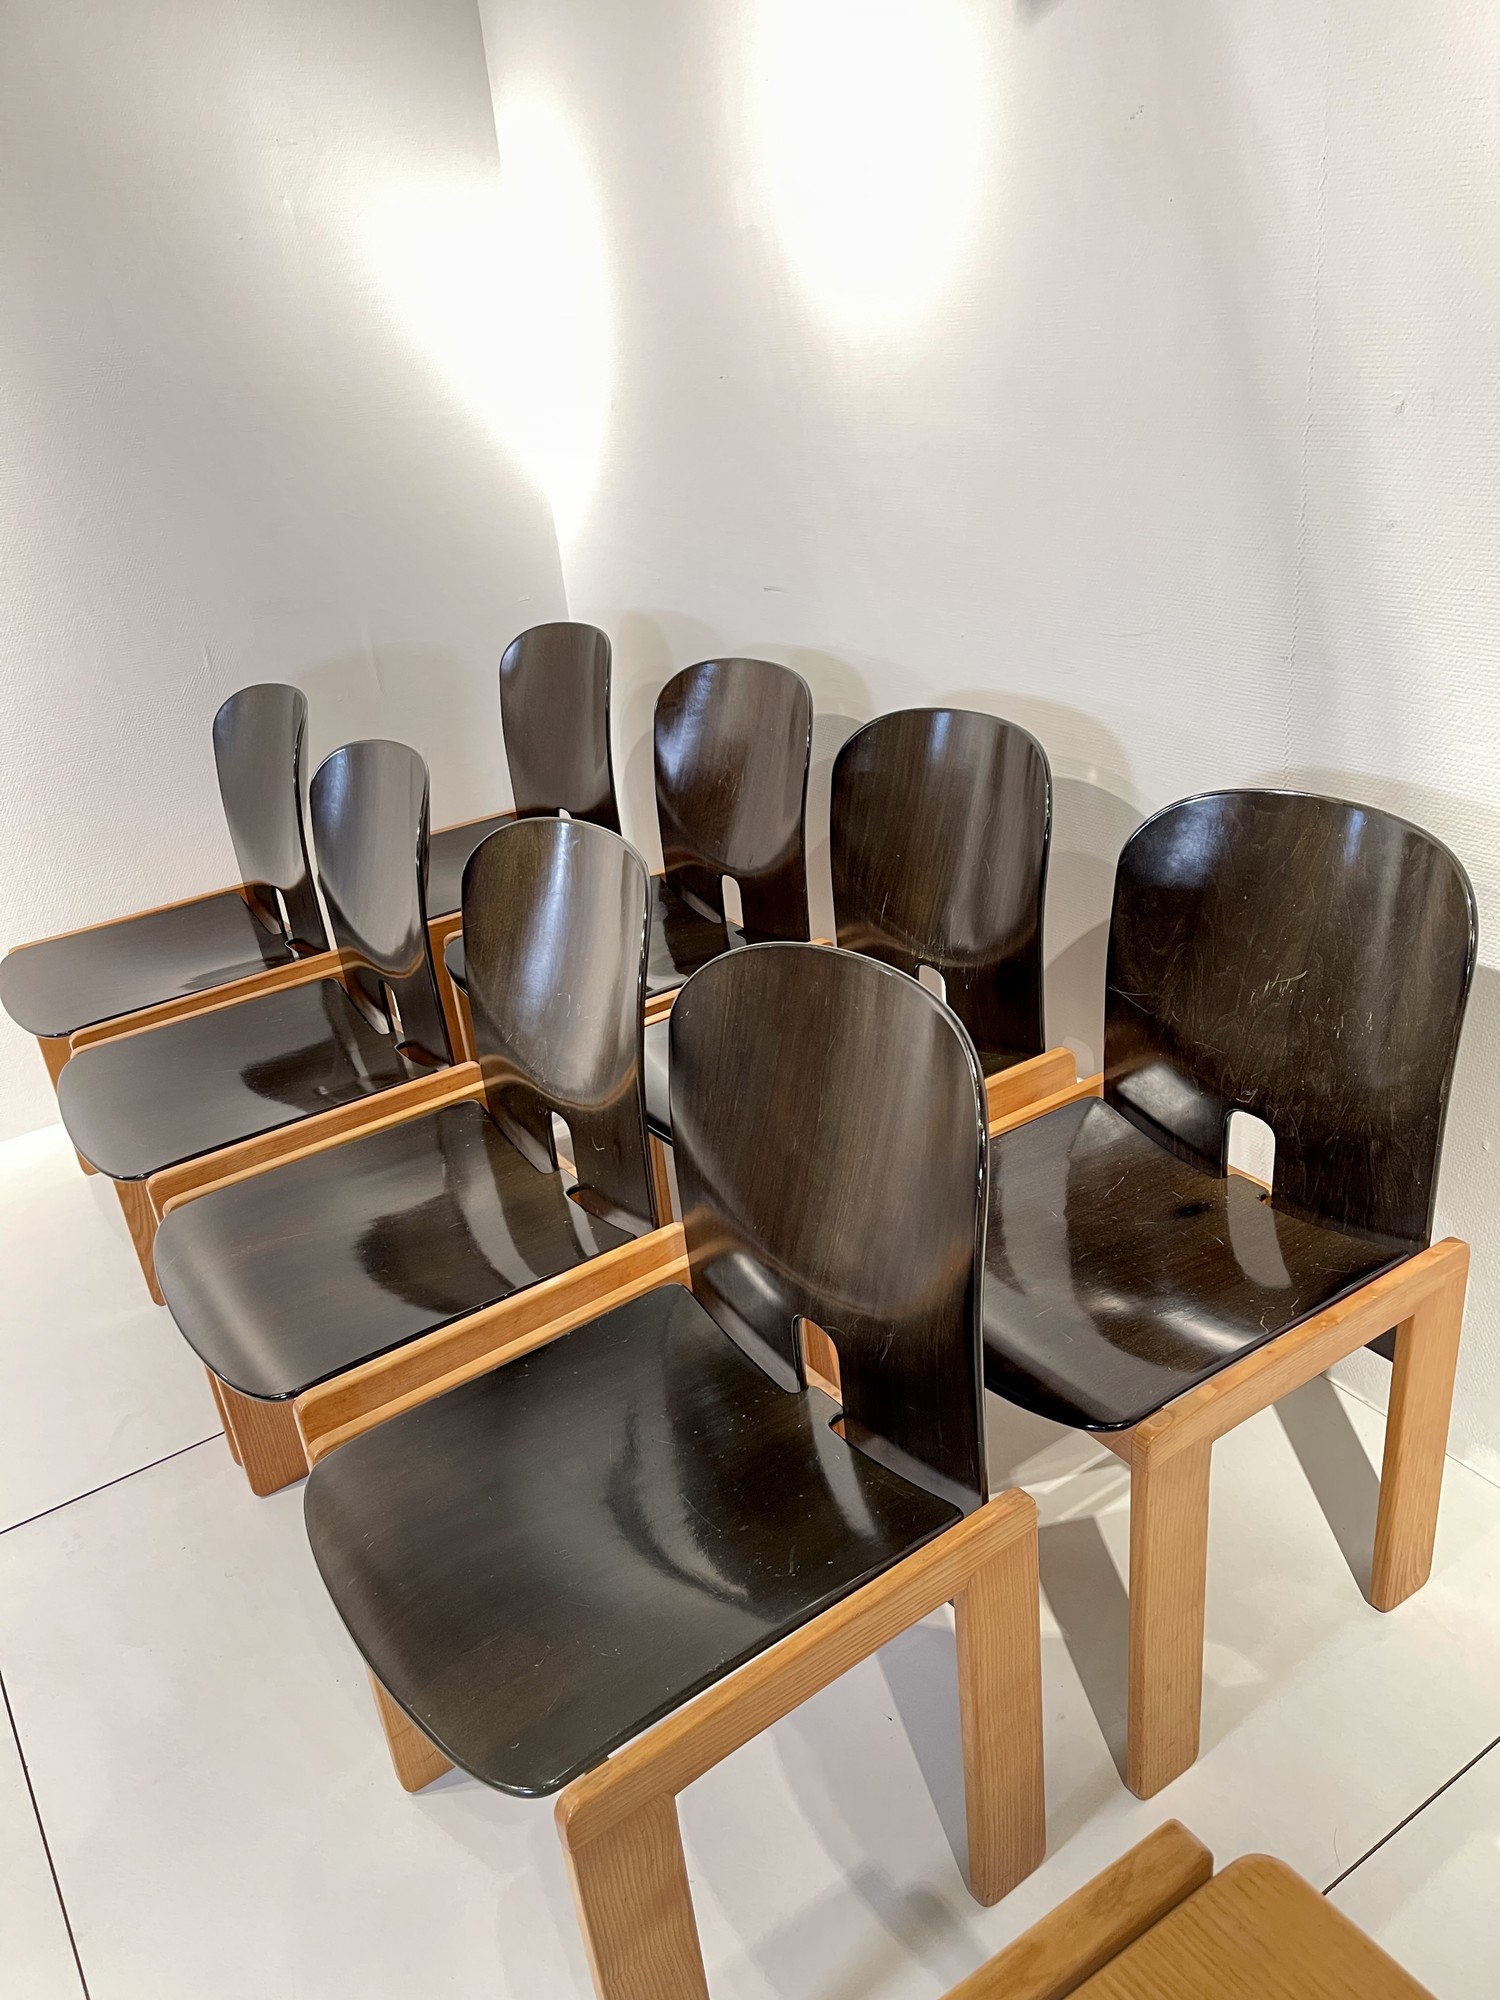 8 chairs model 121 dining chairs designed by Afra and Tobia Scarpa and manufactured by Cassina, Italy 1965